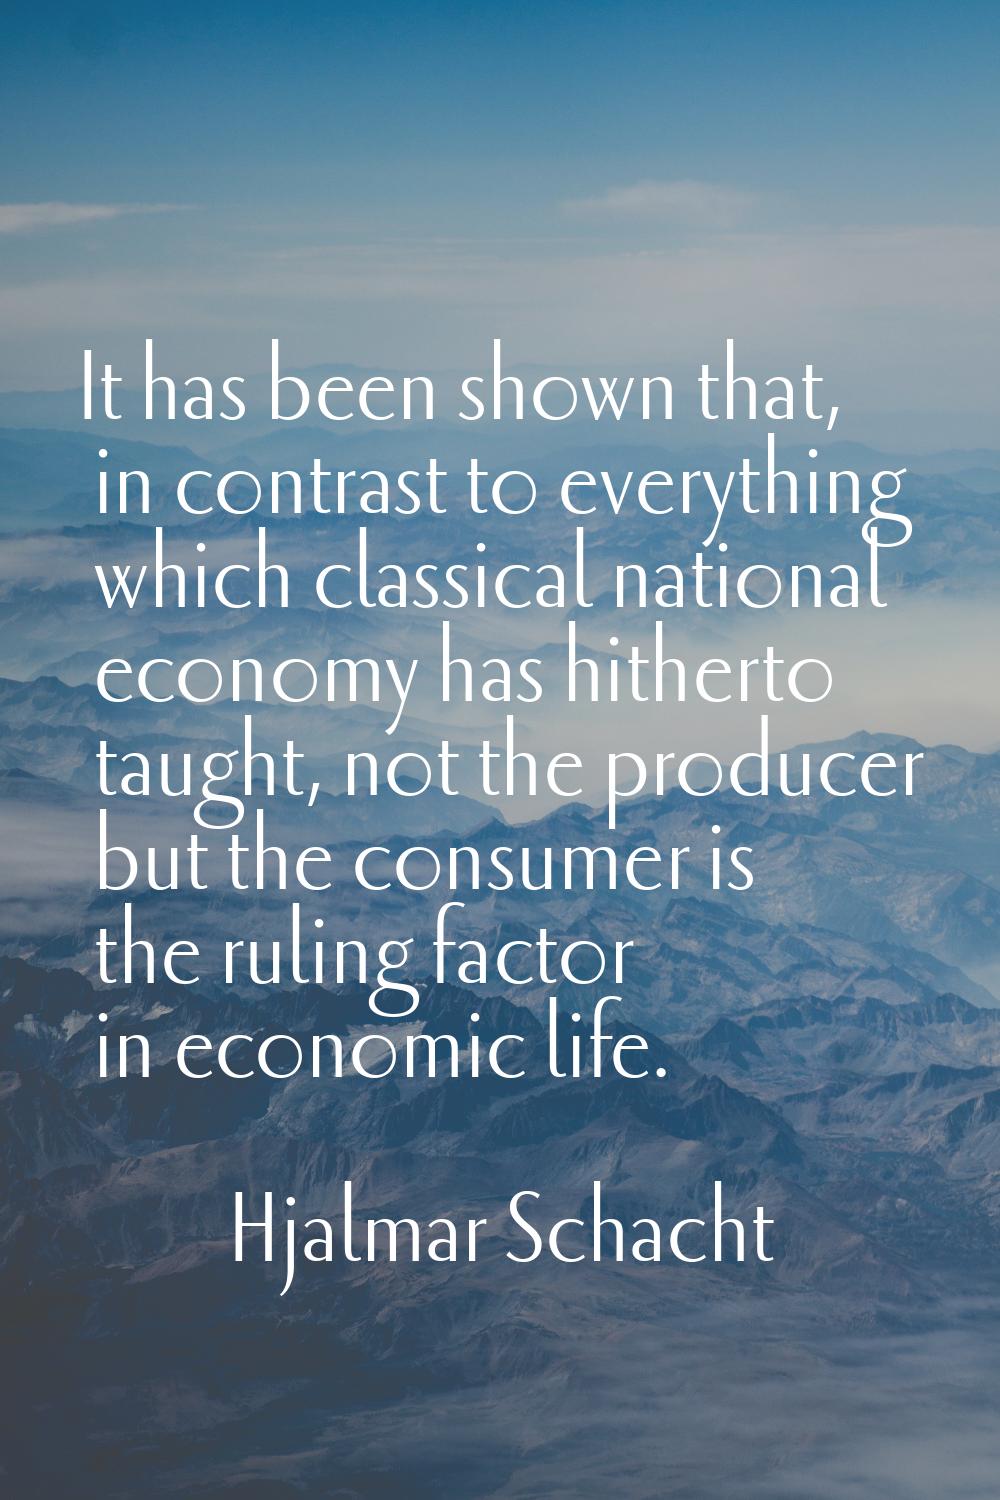 It has been shown that, in contrast to everything which classical national economy has hitherto tau